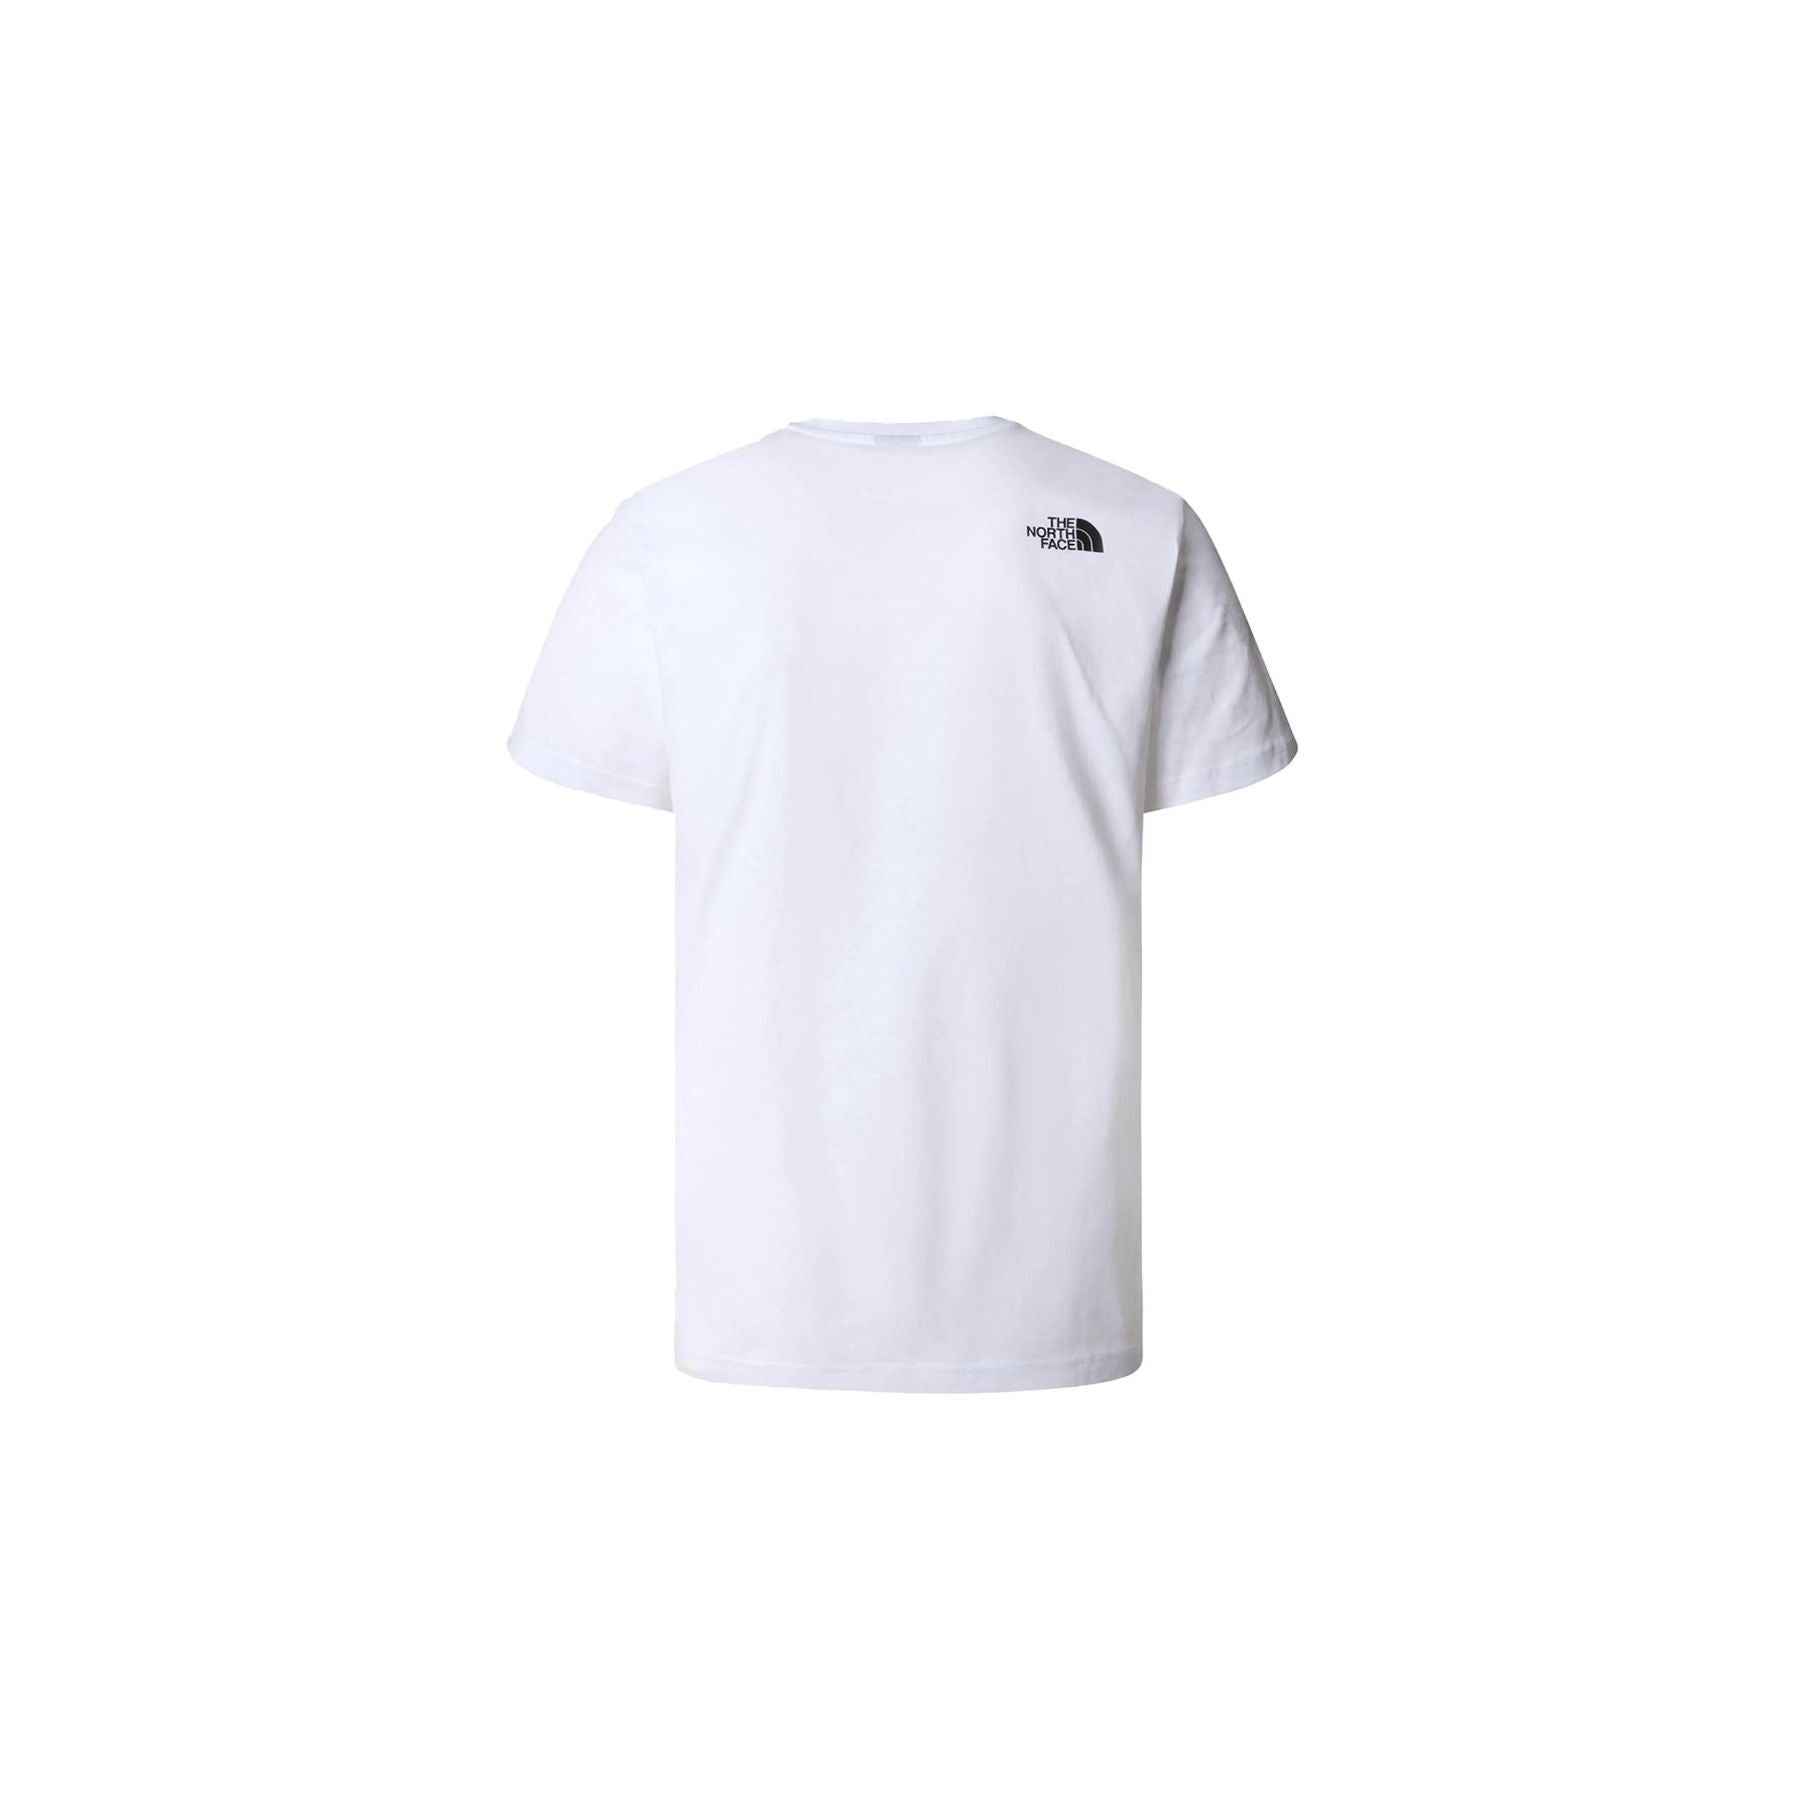 THE NORTH FACE NEVER STOP EX TEE M